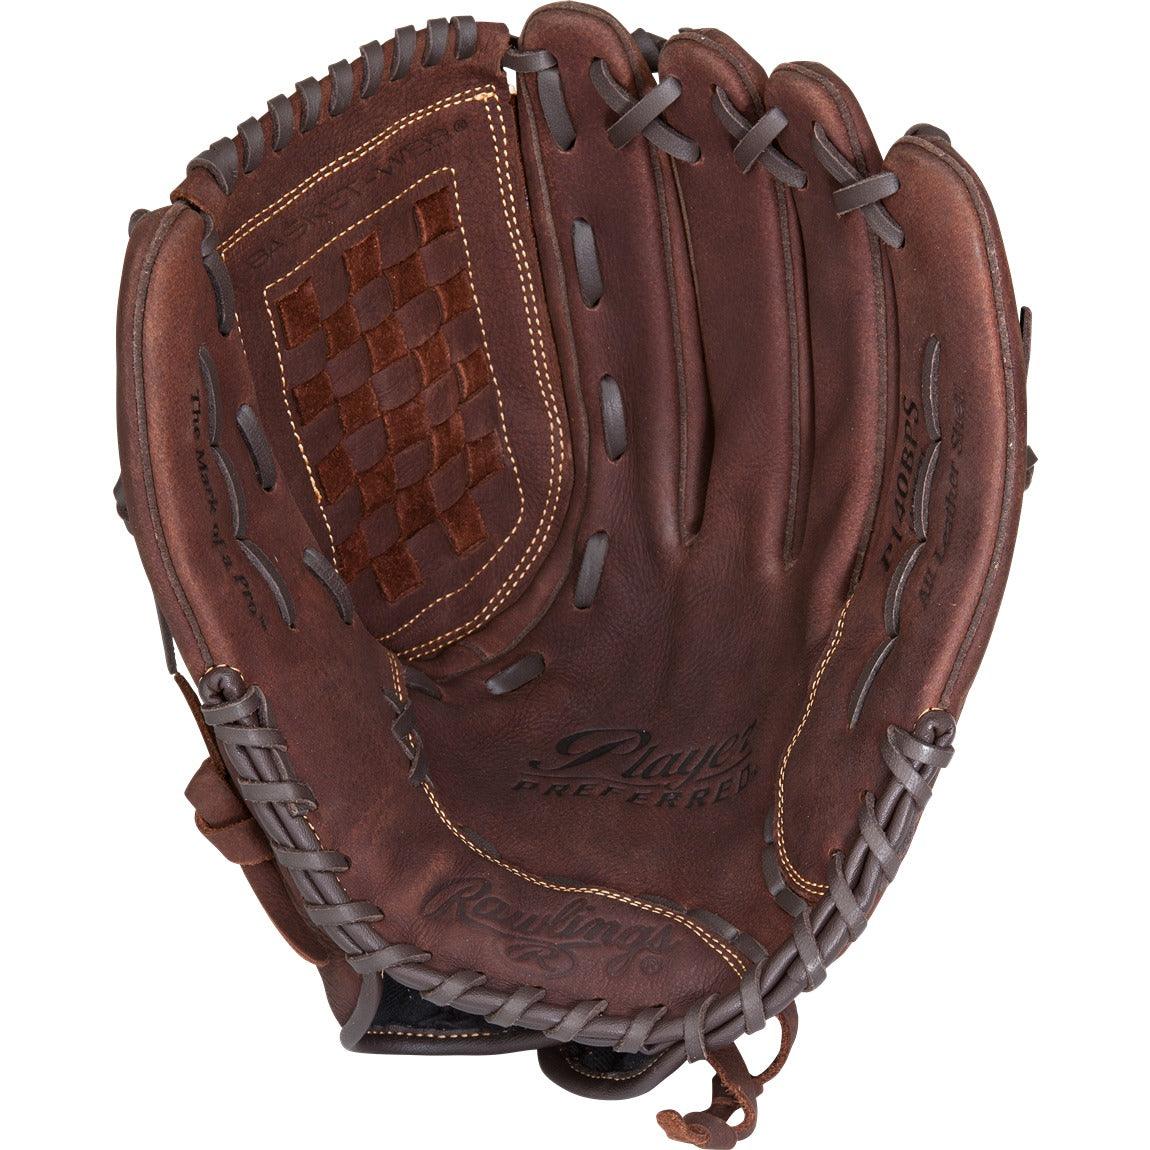 Player Preferred 14" Adult Softball Glove - Sports Excellence